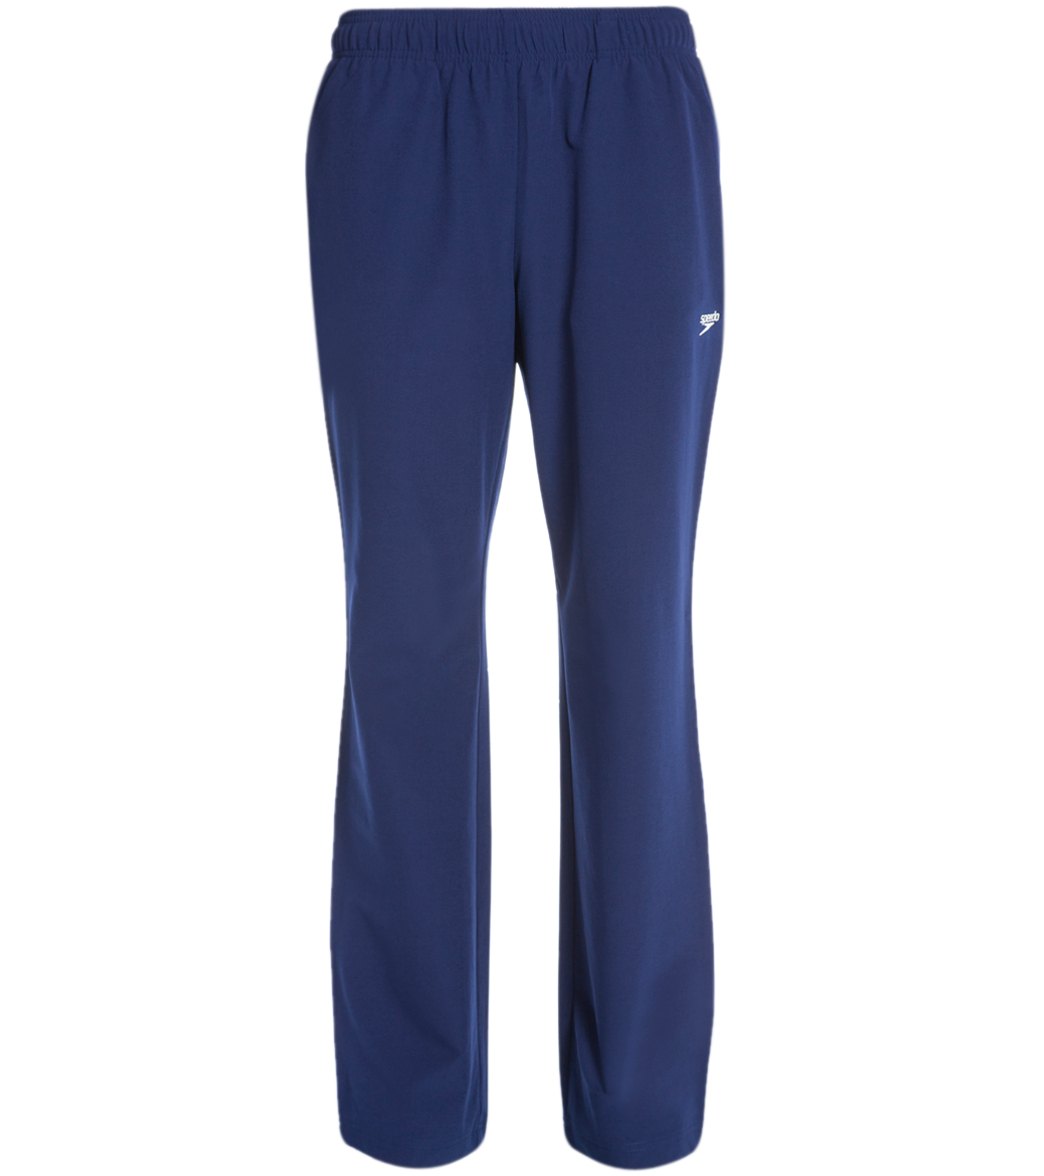 Speedo Men's Boom Force Warm Up Pants - Navy X-Small Polyester - Swimoutlet.com